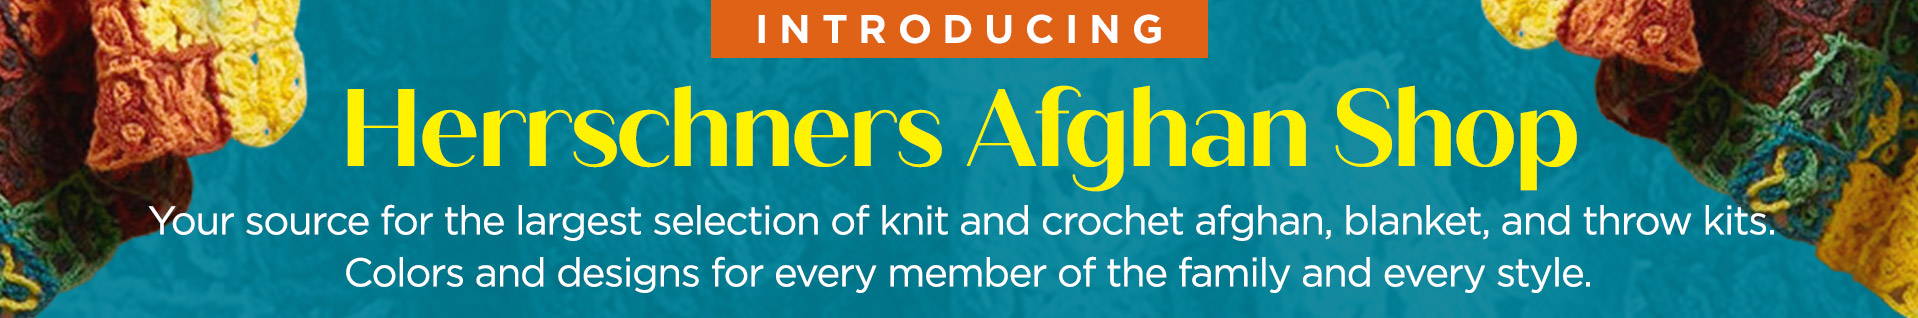 Afghan Shop Your source for the biggest selection of knit & crochet afghan, blanket, and throw kits.  Colors and designs for every member of the family and every style. 